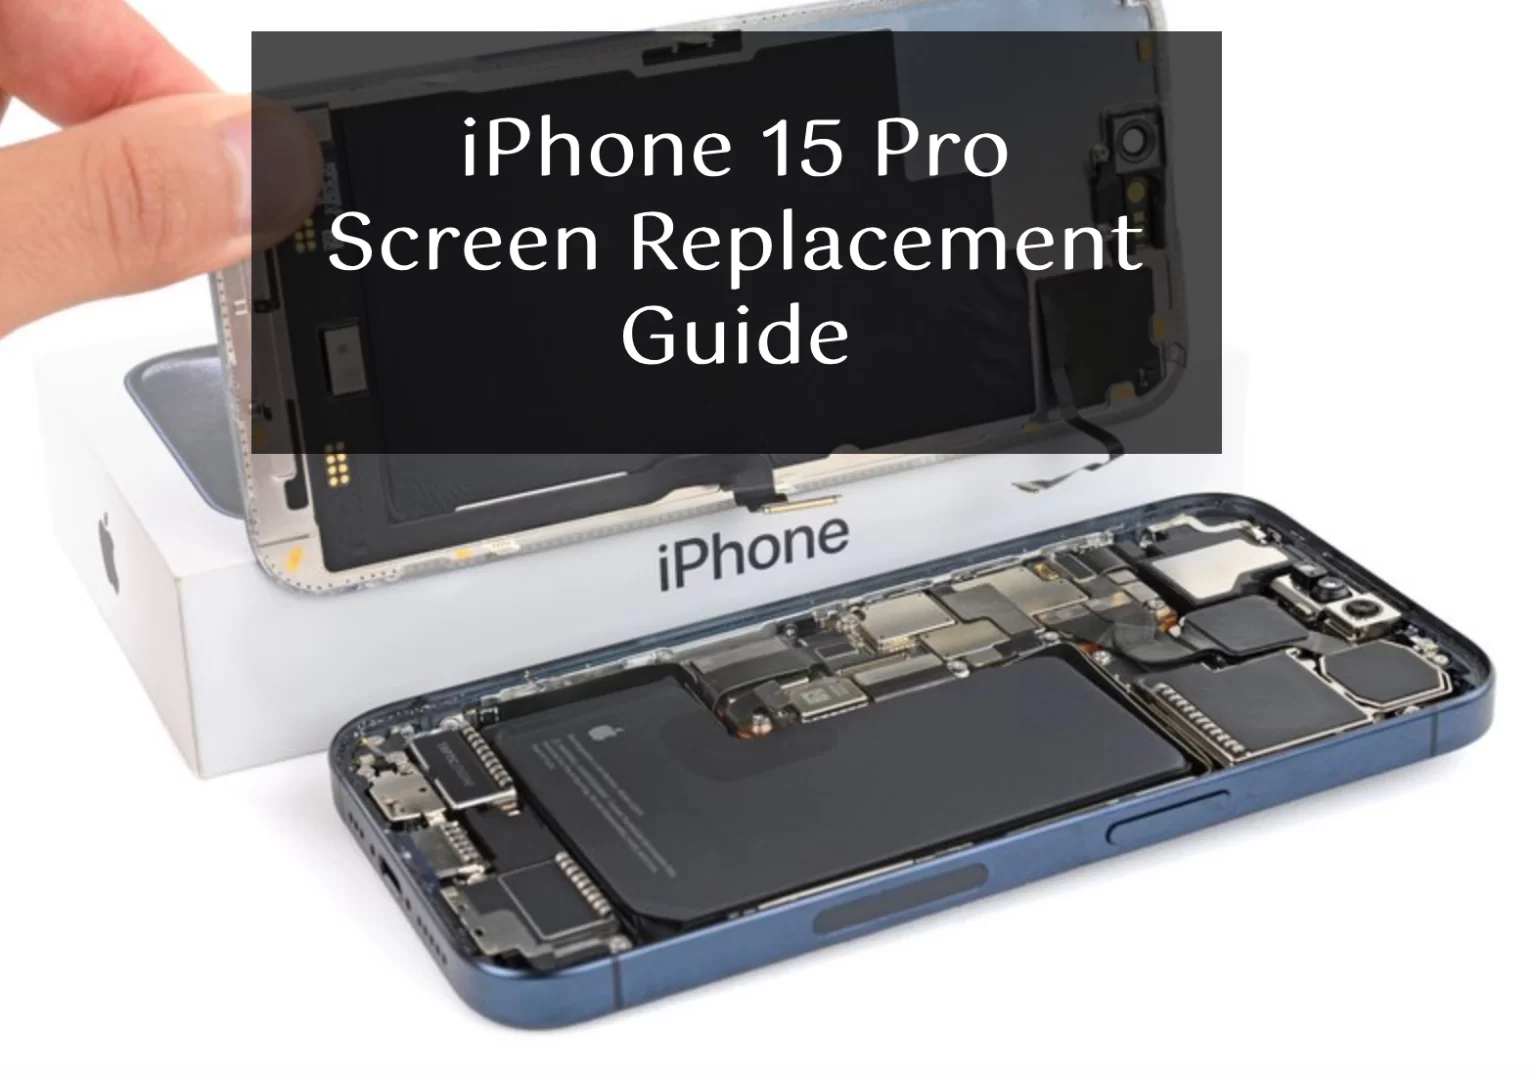 iPhone 15 Pro with repair tools and new screen.